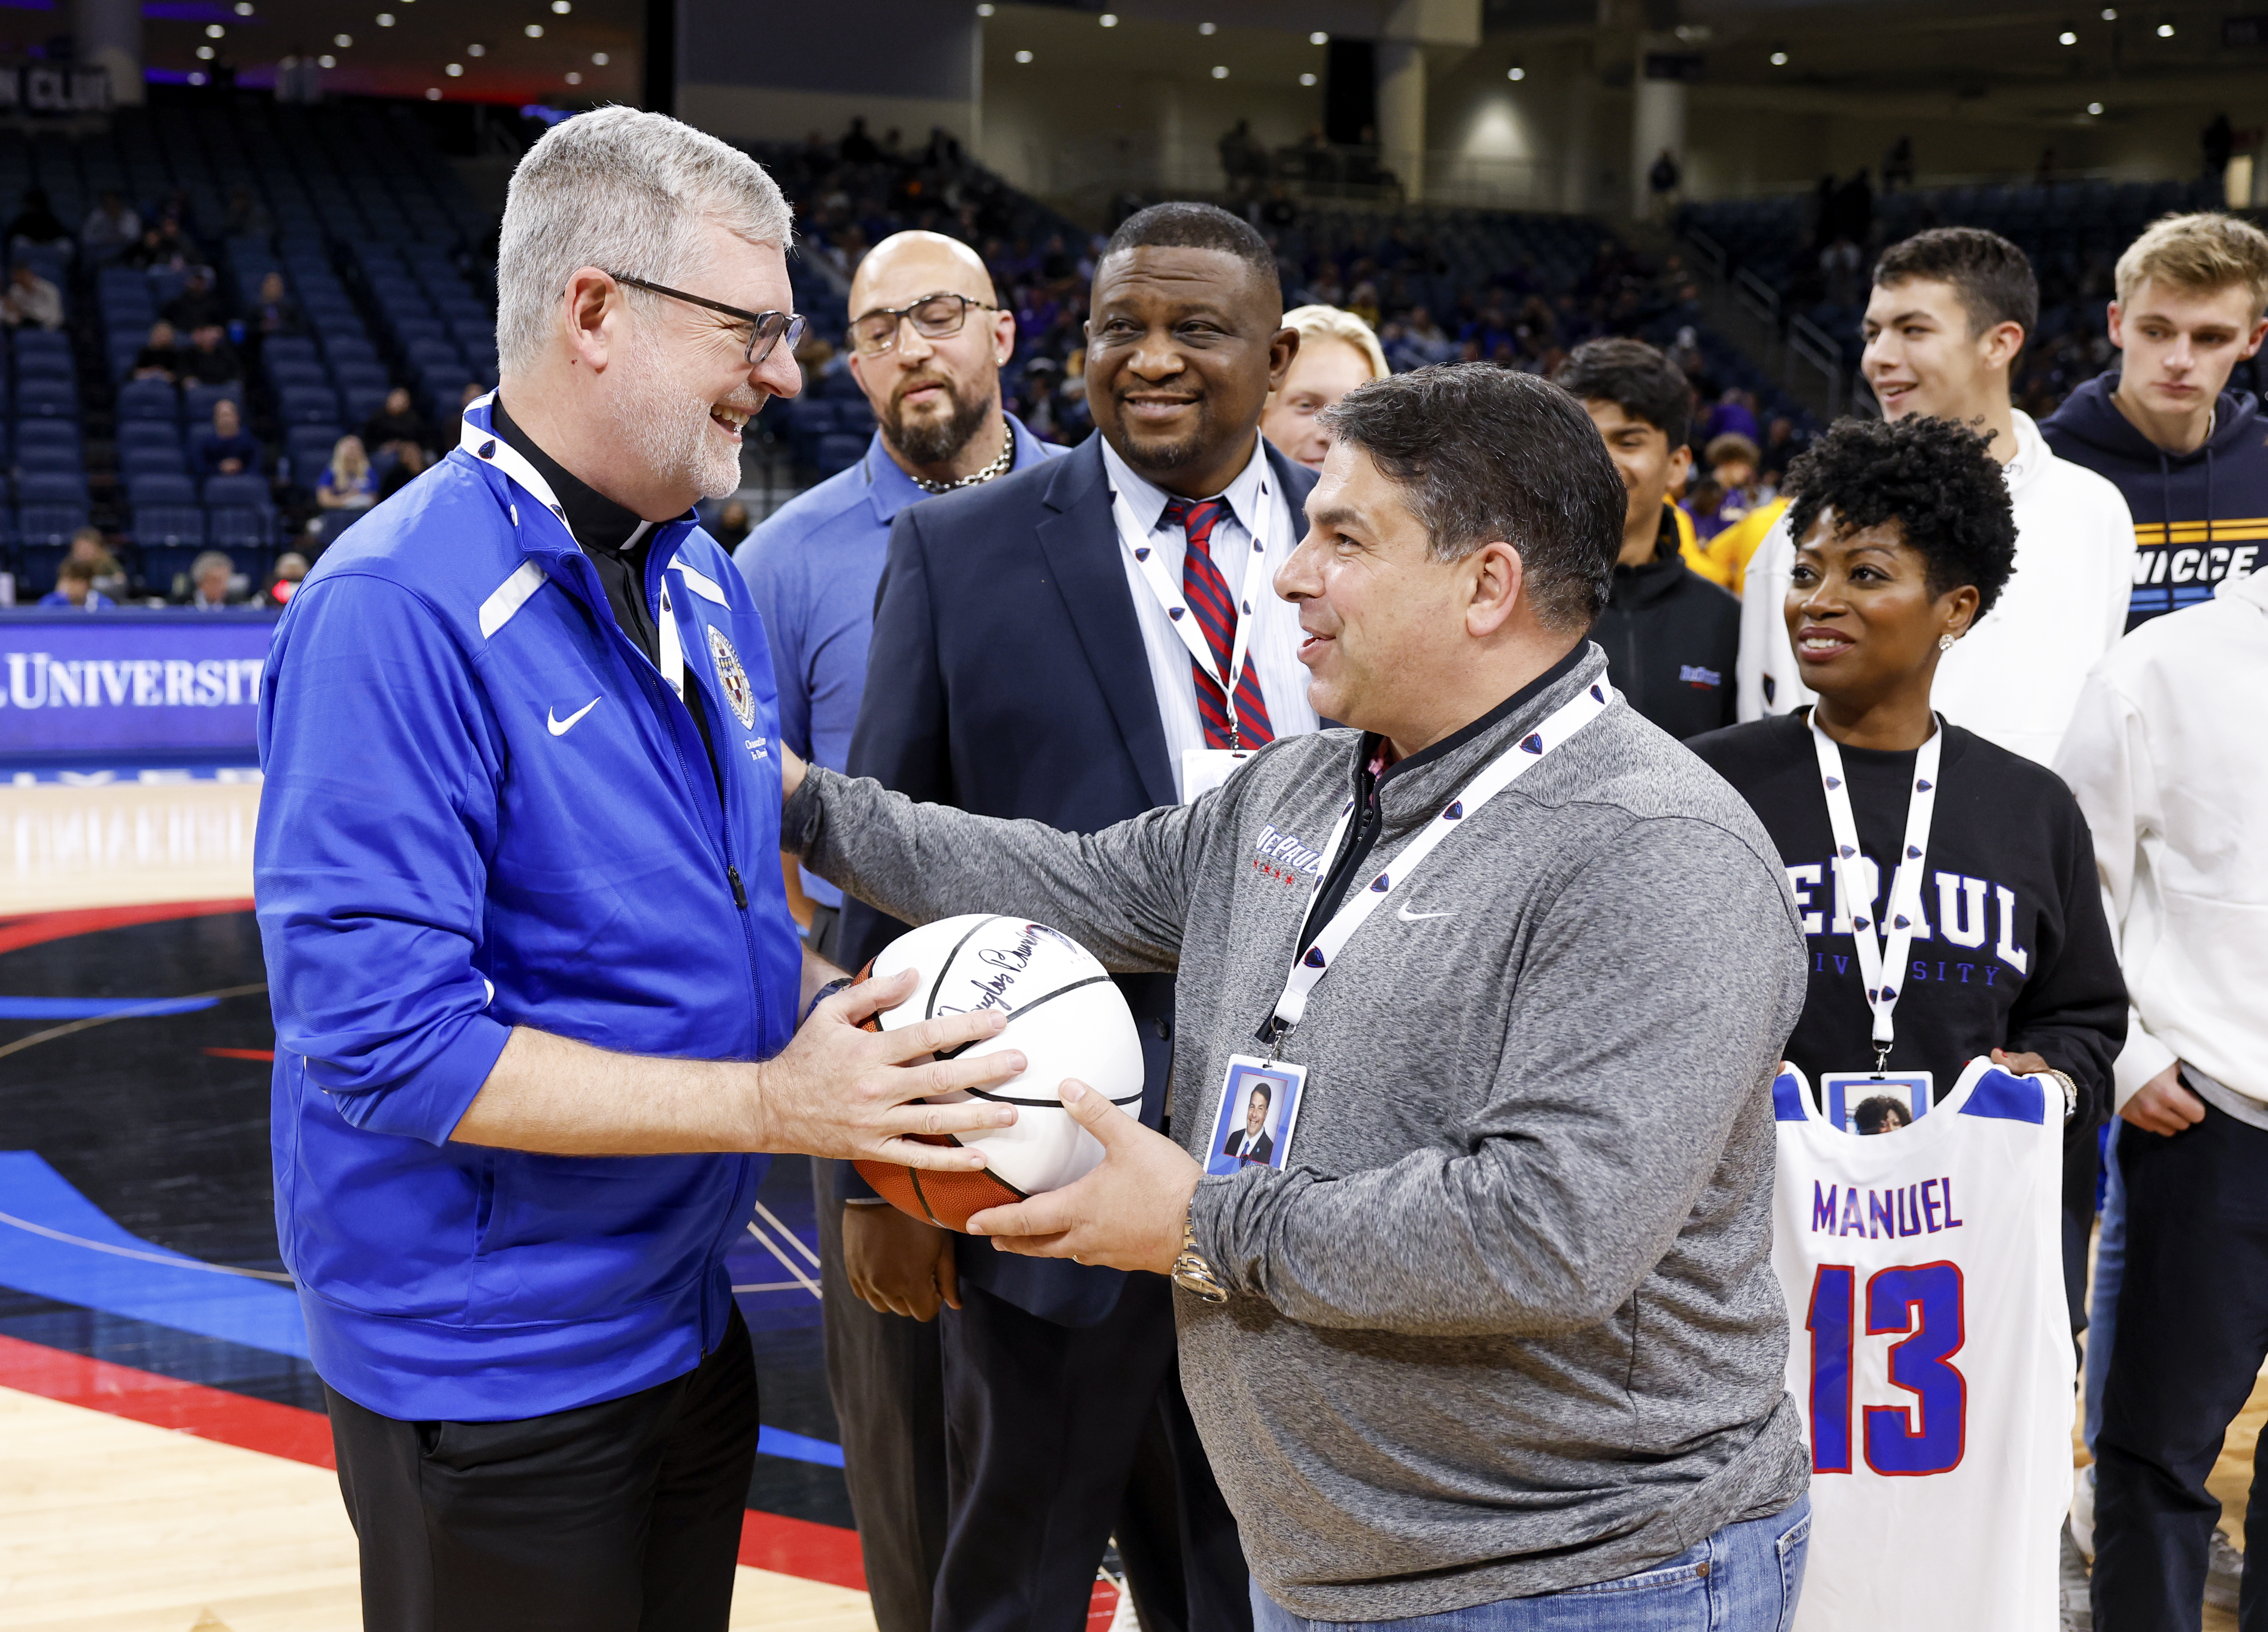 President Rob Manuel was recognized during the Nov. 11 basketball men’s game vs. Western Illinois. In this photo, Manuel is joined by DePaul Chancellor and former President Rev. Dennis H. Holtschneider, C.M., Vice President and Director of Athletics DeWayne Peevy, and Manuel’s wife Wilmara, holding a jersey for the university’s 13th president. The Blue Demons won 86-74. (DePaul University/Steve Woltmann)